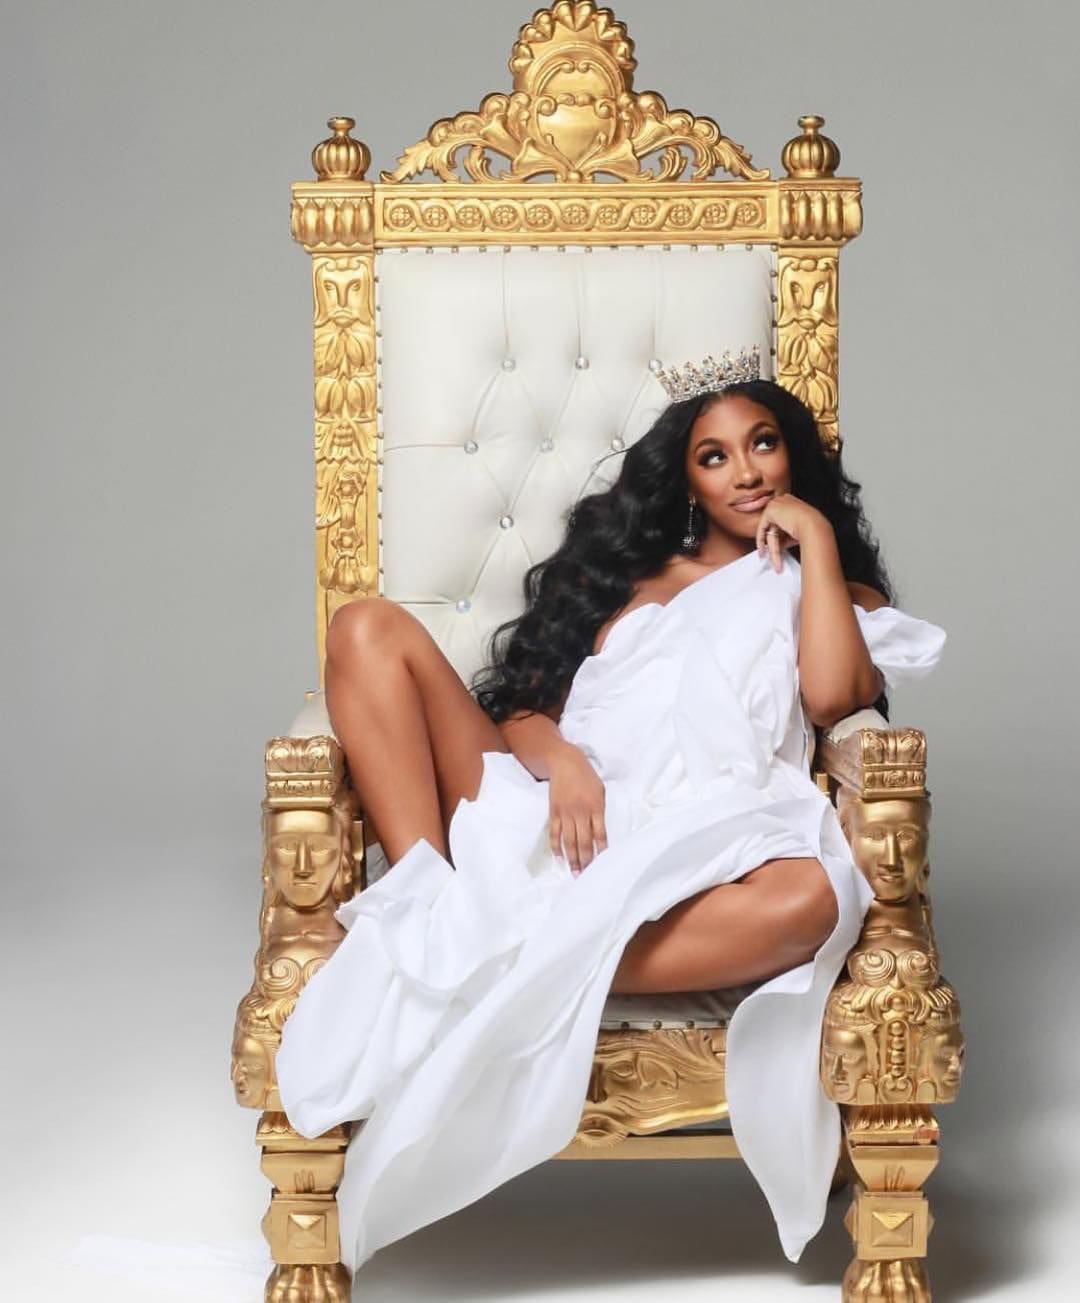 Porsha Williams' Fans Tell Her Not To Come Off Her Throne For Anyone